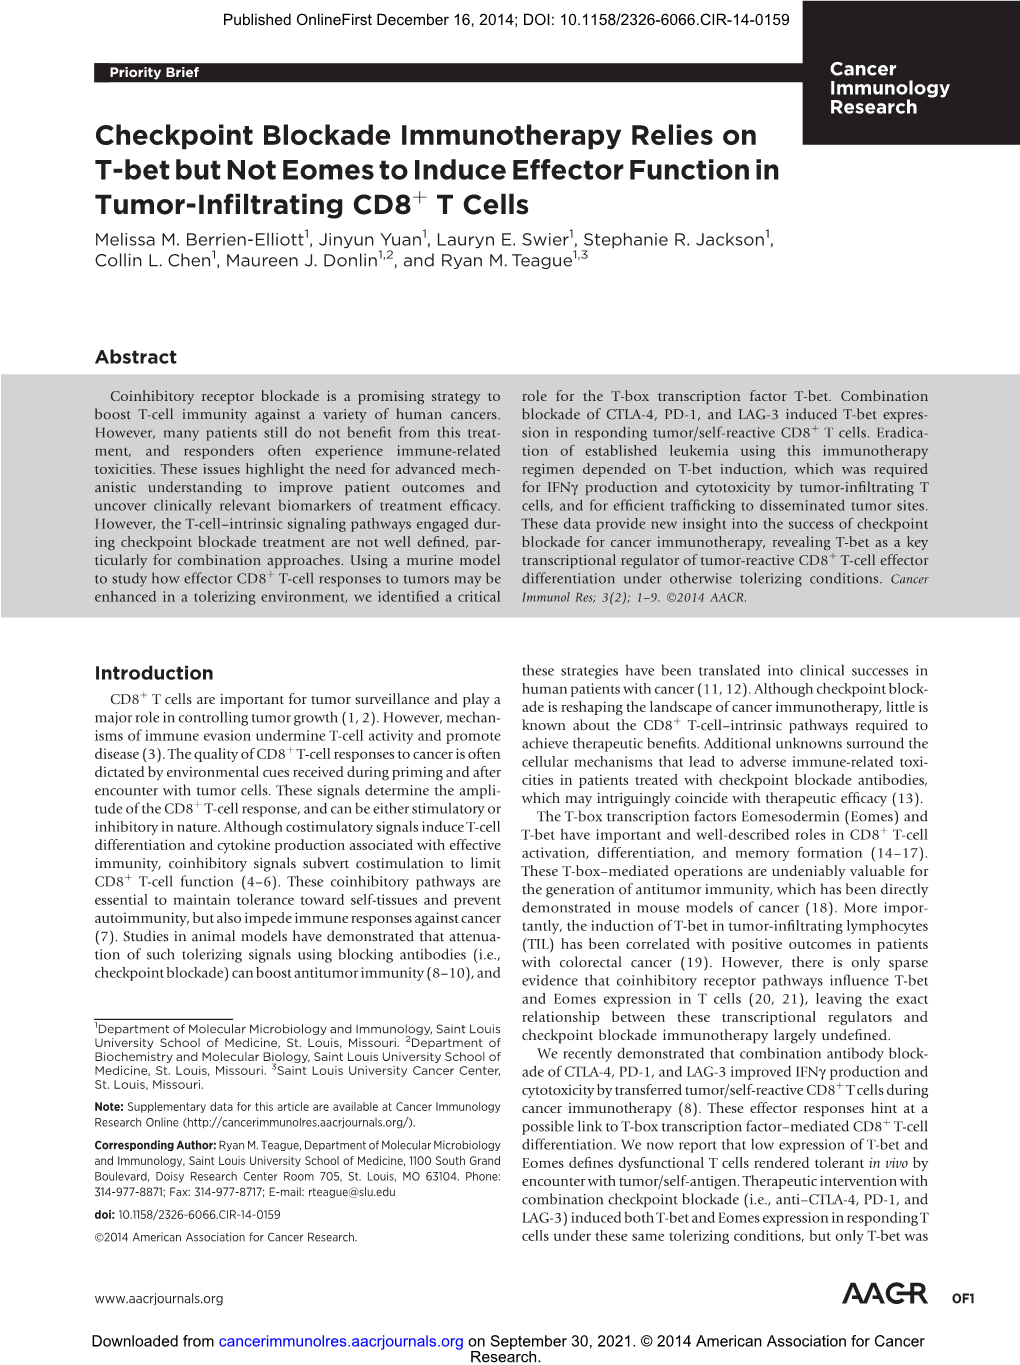 Checkpoint Blockade Immunotherapy Relies on T-Bet but Not Eomes to Induce Effector Function in Tumor-Inﬁltrating Cd8þ T Cells Melissa M